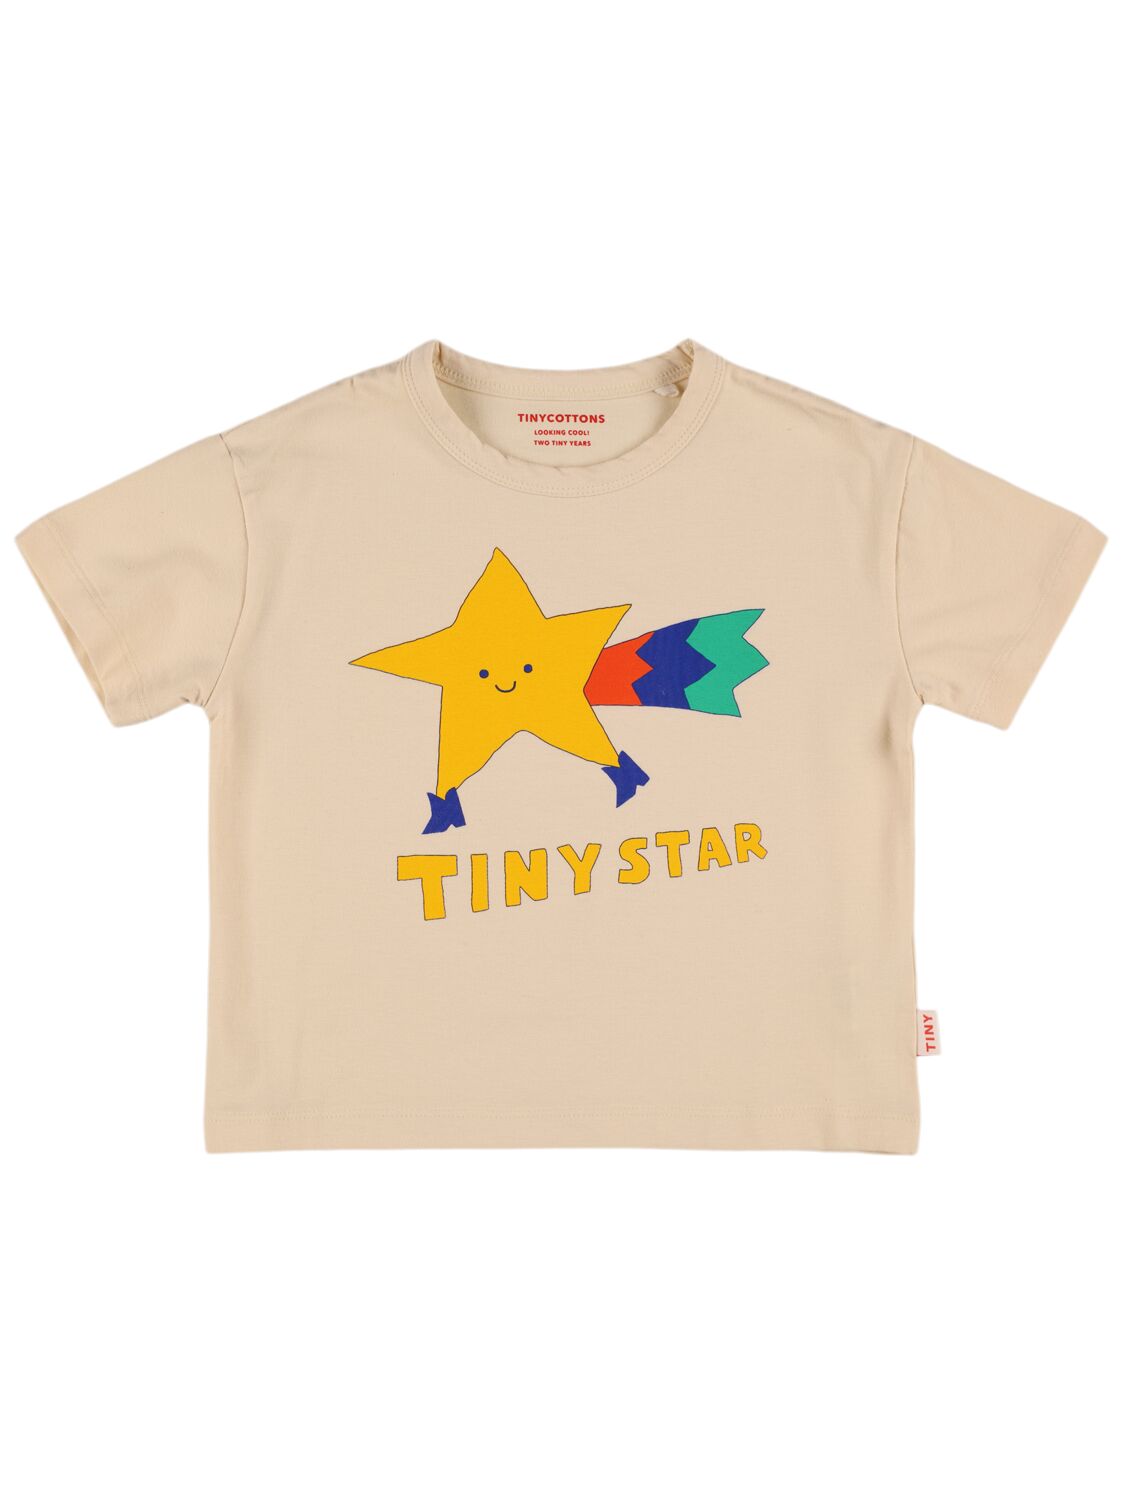 Tiny Cottons Kids' Printed Organic Cotton T-shirt In Beige